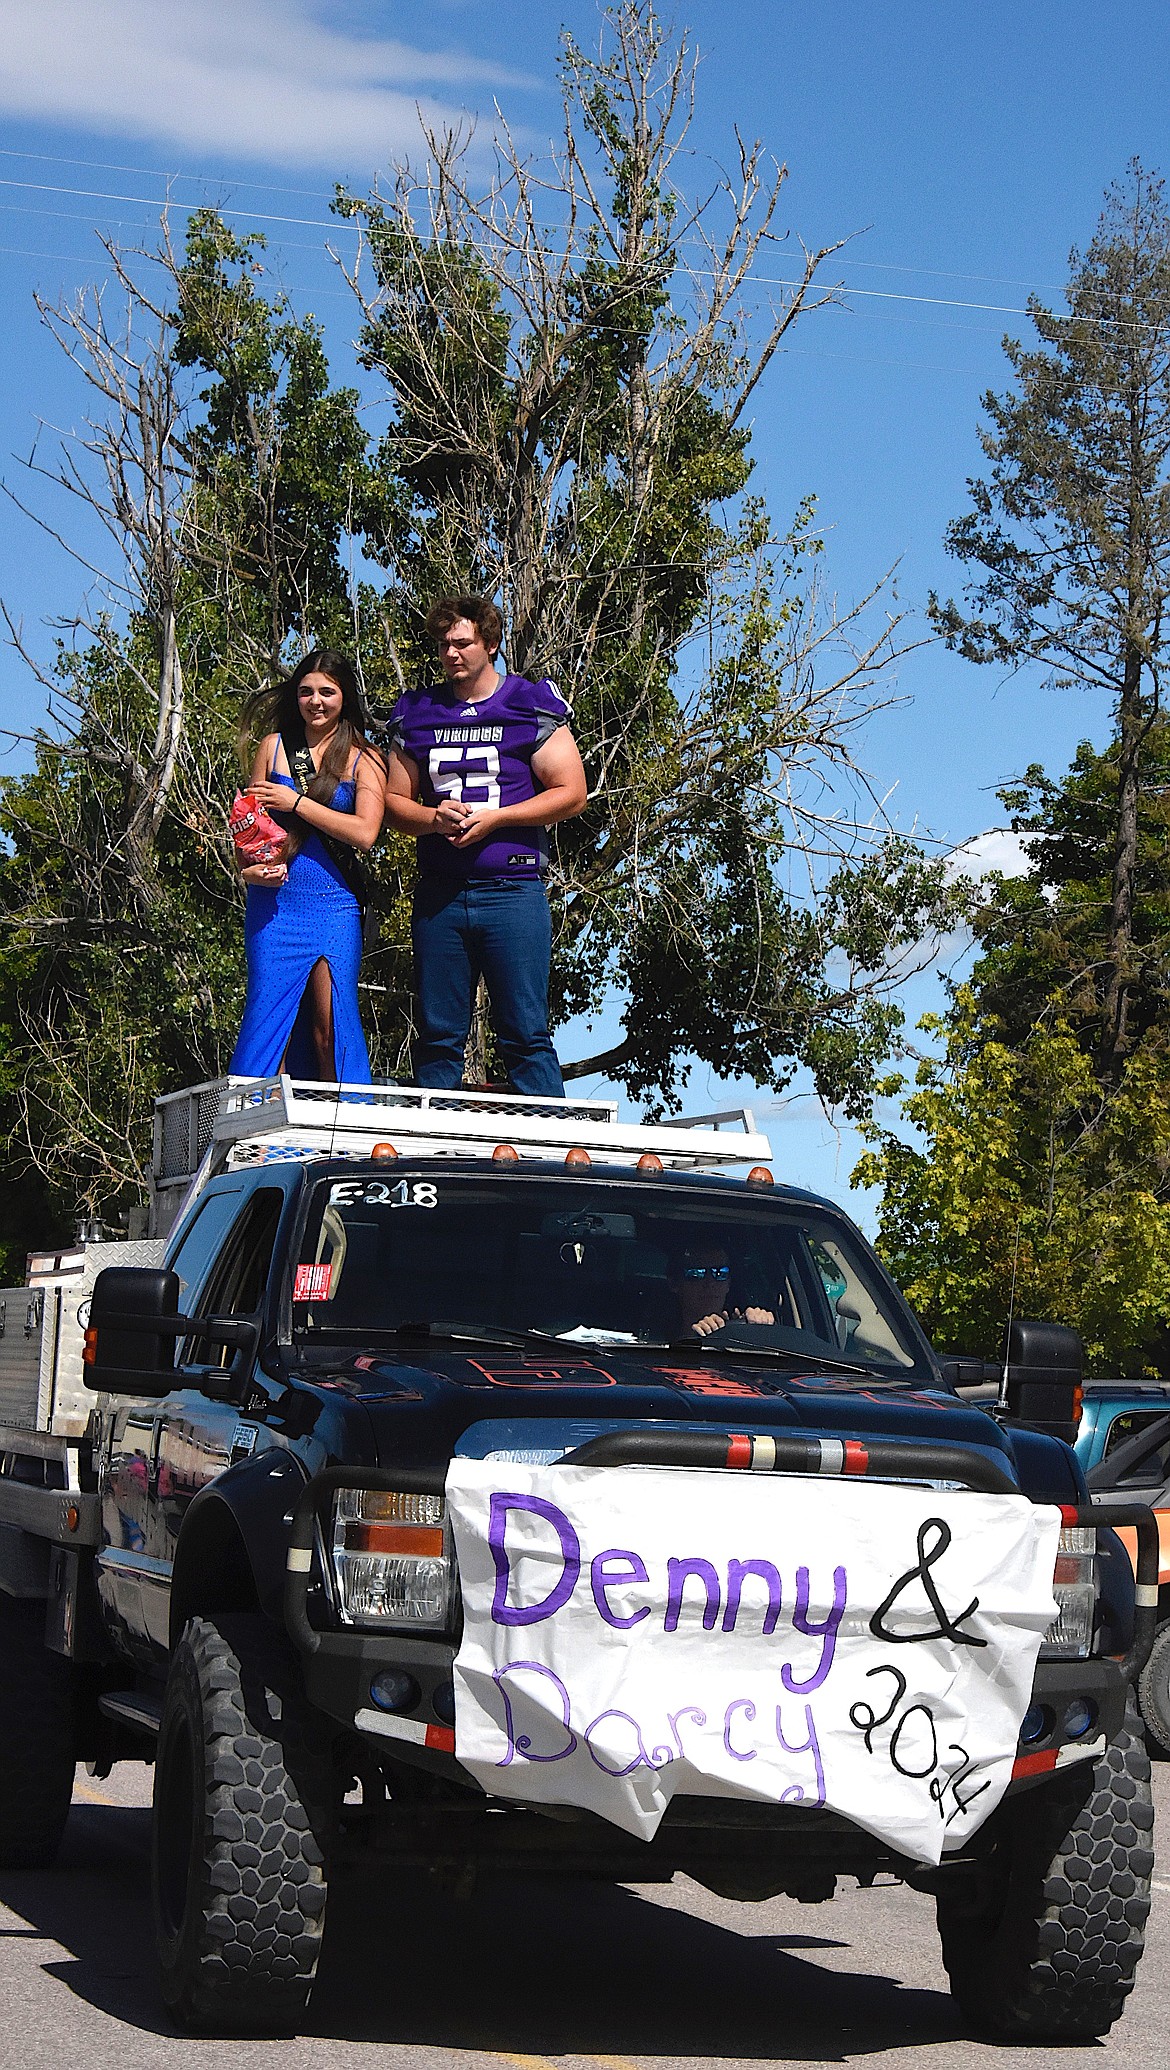 Charlo Homecoming queen candidate Darcy Coleman and king candidate Denny Black rode atop a fire truck as they wend their way through Charlo during Friday's parade. (Berl Tiskus/Leader)